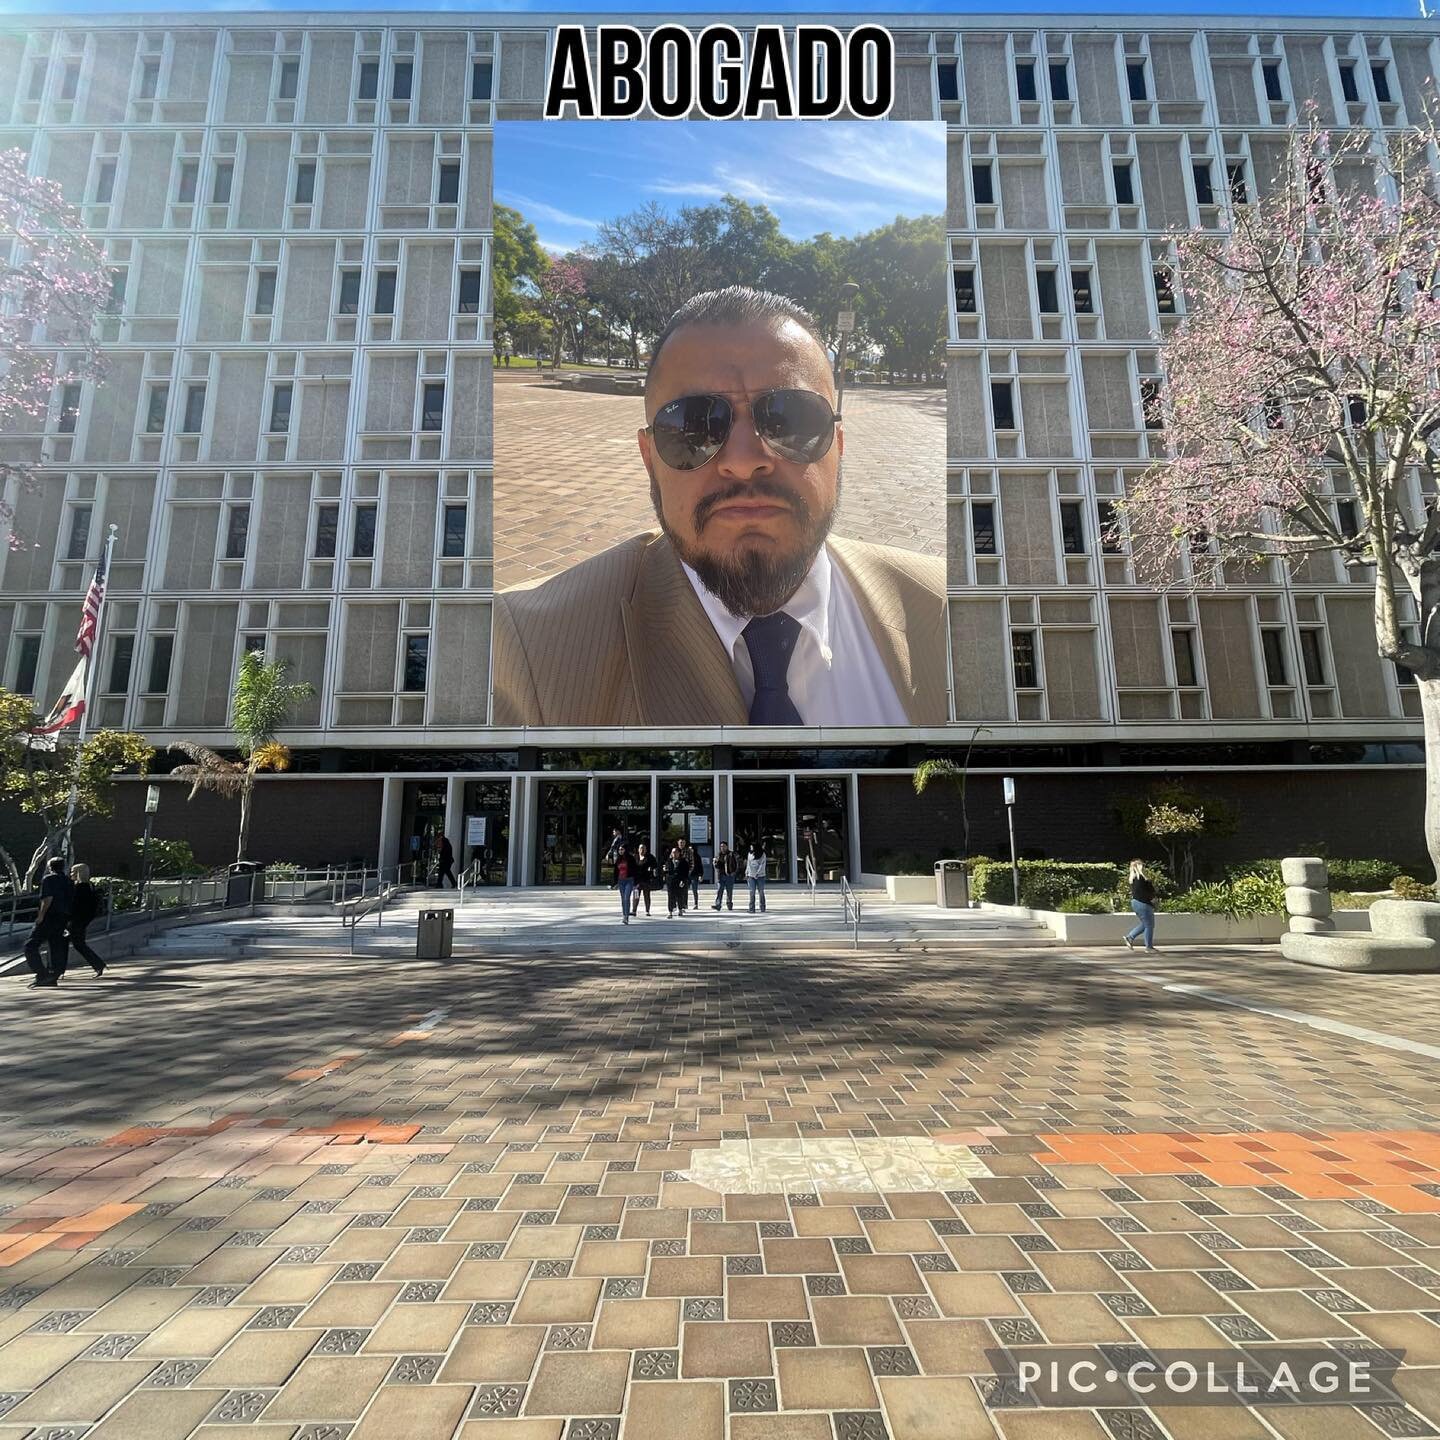 For the second time this week, I was asked by a Deputy at the courthouse if I had case, and if so, to please wait outside for my attorney. 🤔 maybe it&rsquo;s the hair, maybe we are still not past such classifications.  #abogado #idontneedanapology #